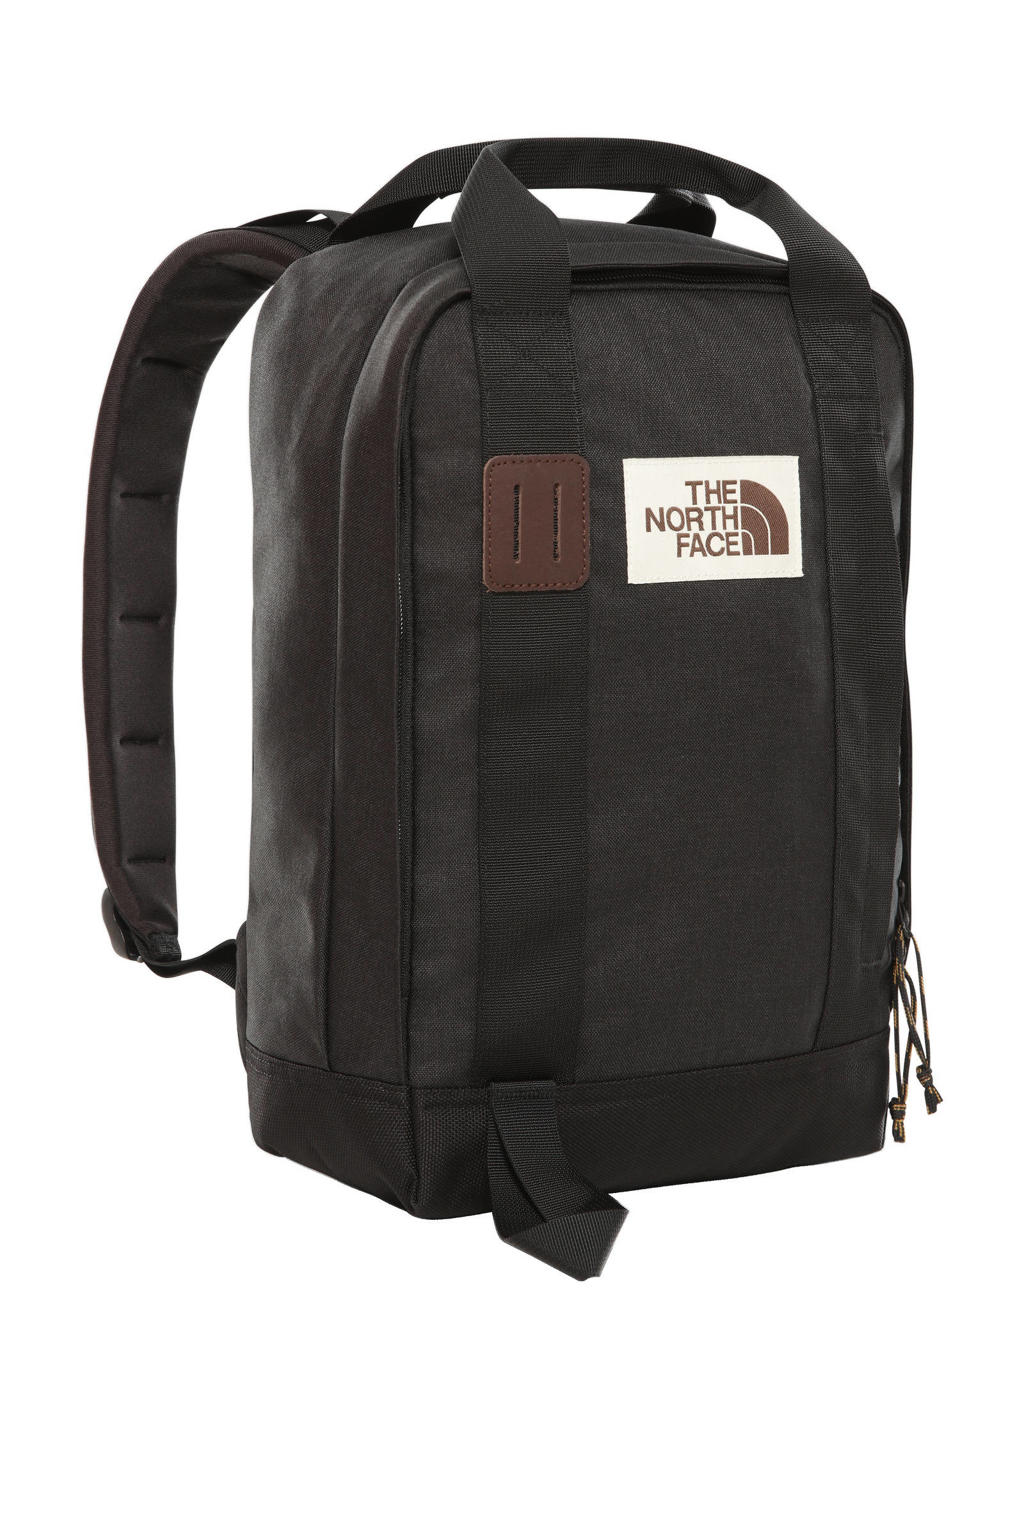 The North Face  rugzak Tote Pack zwart